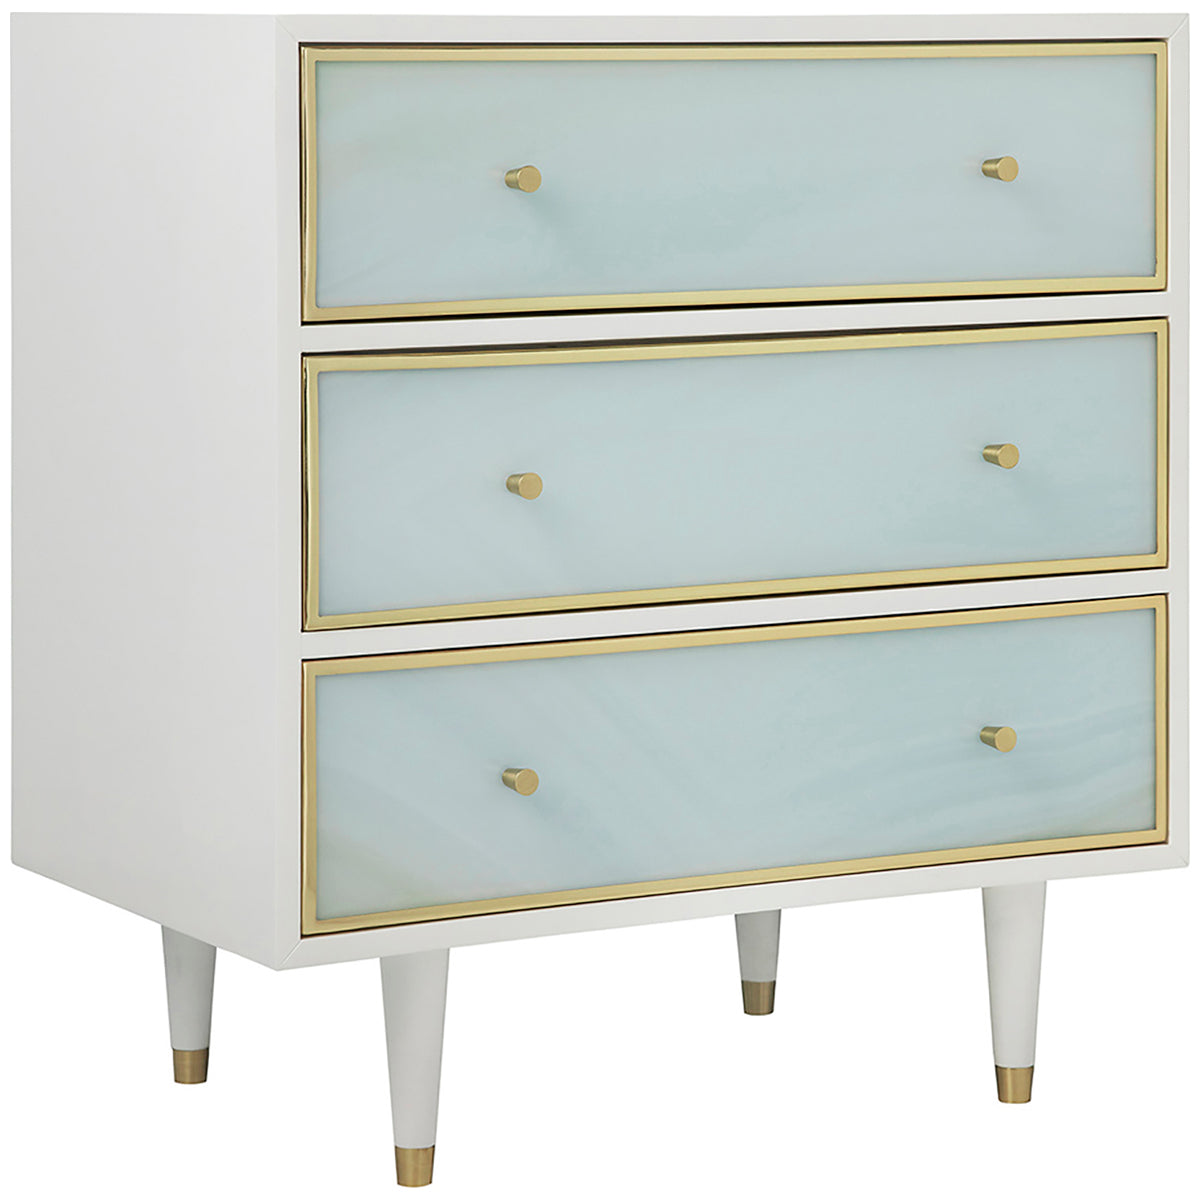 Somerset Bay Home Seaglass Bedside Chest